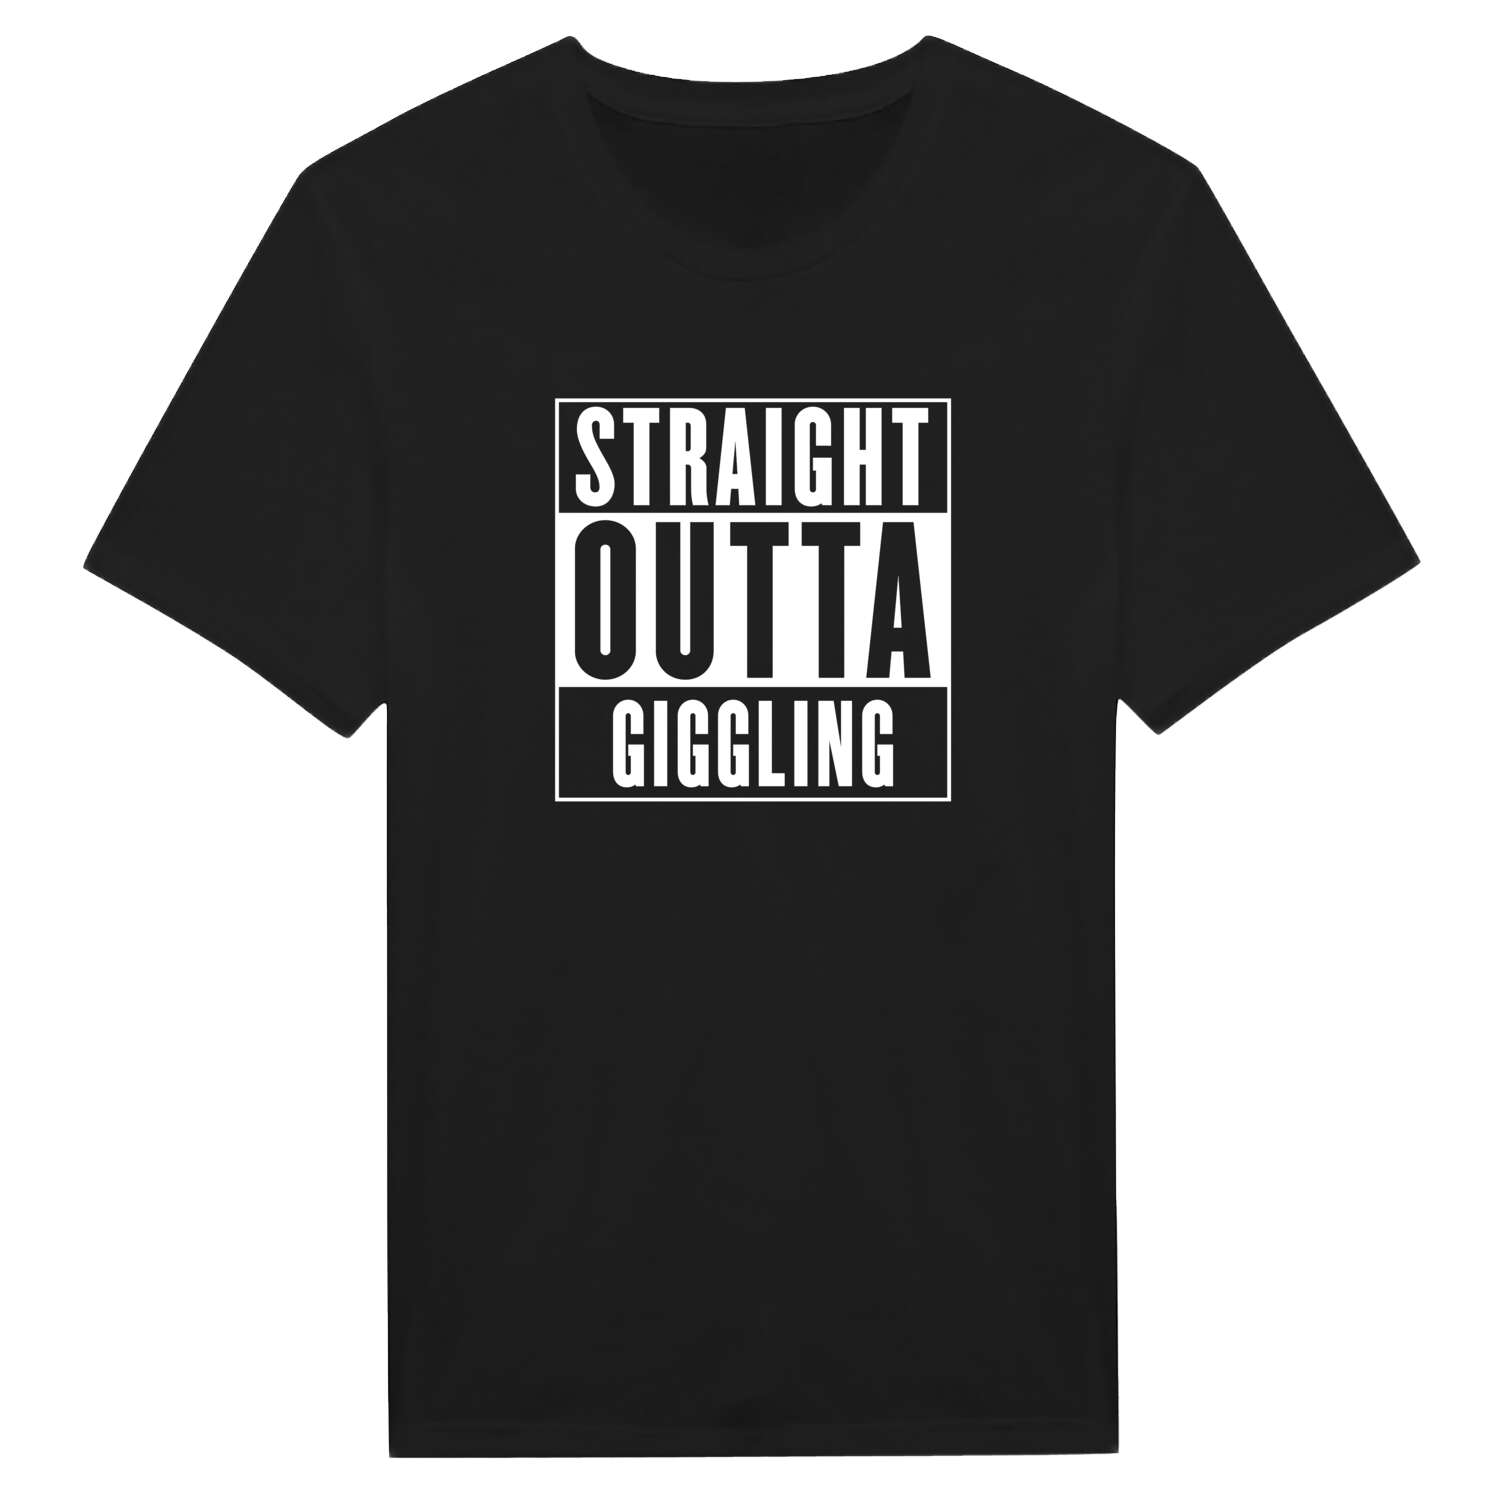 Giggling T-Shirt »Straight Outta«